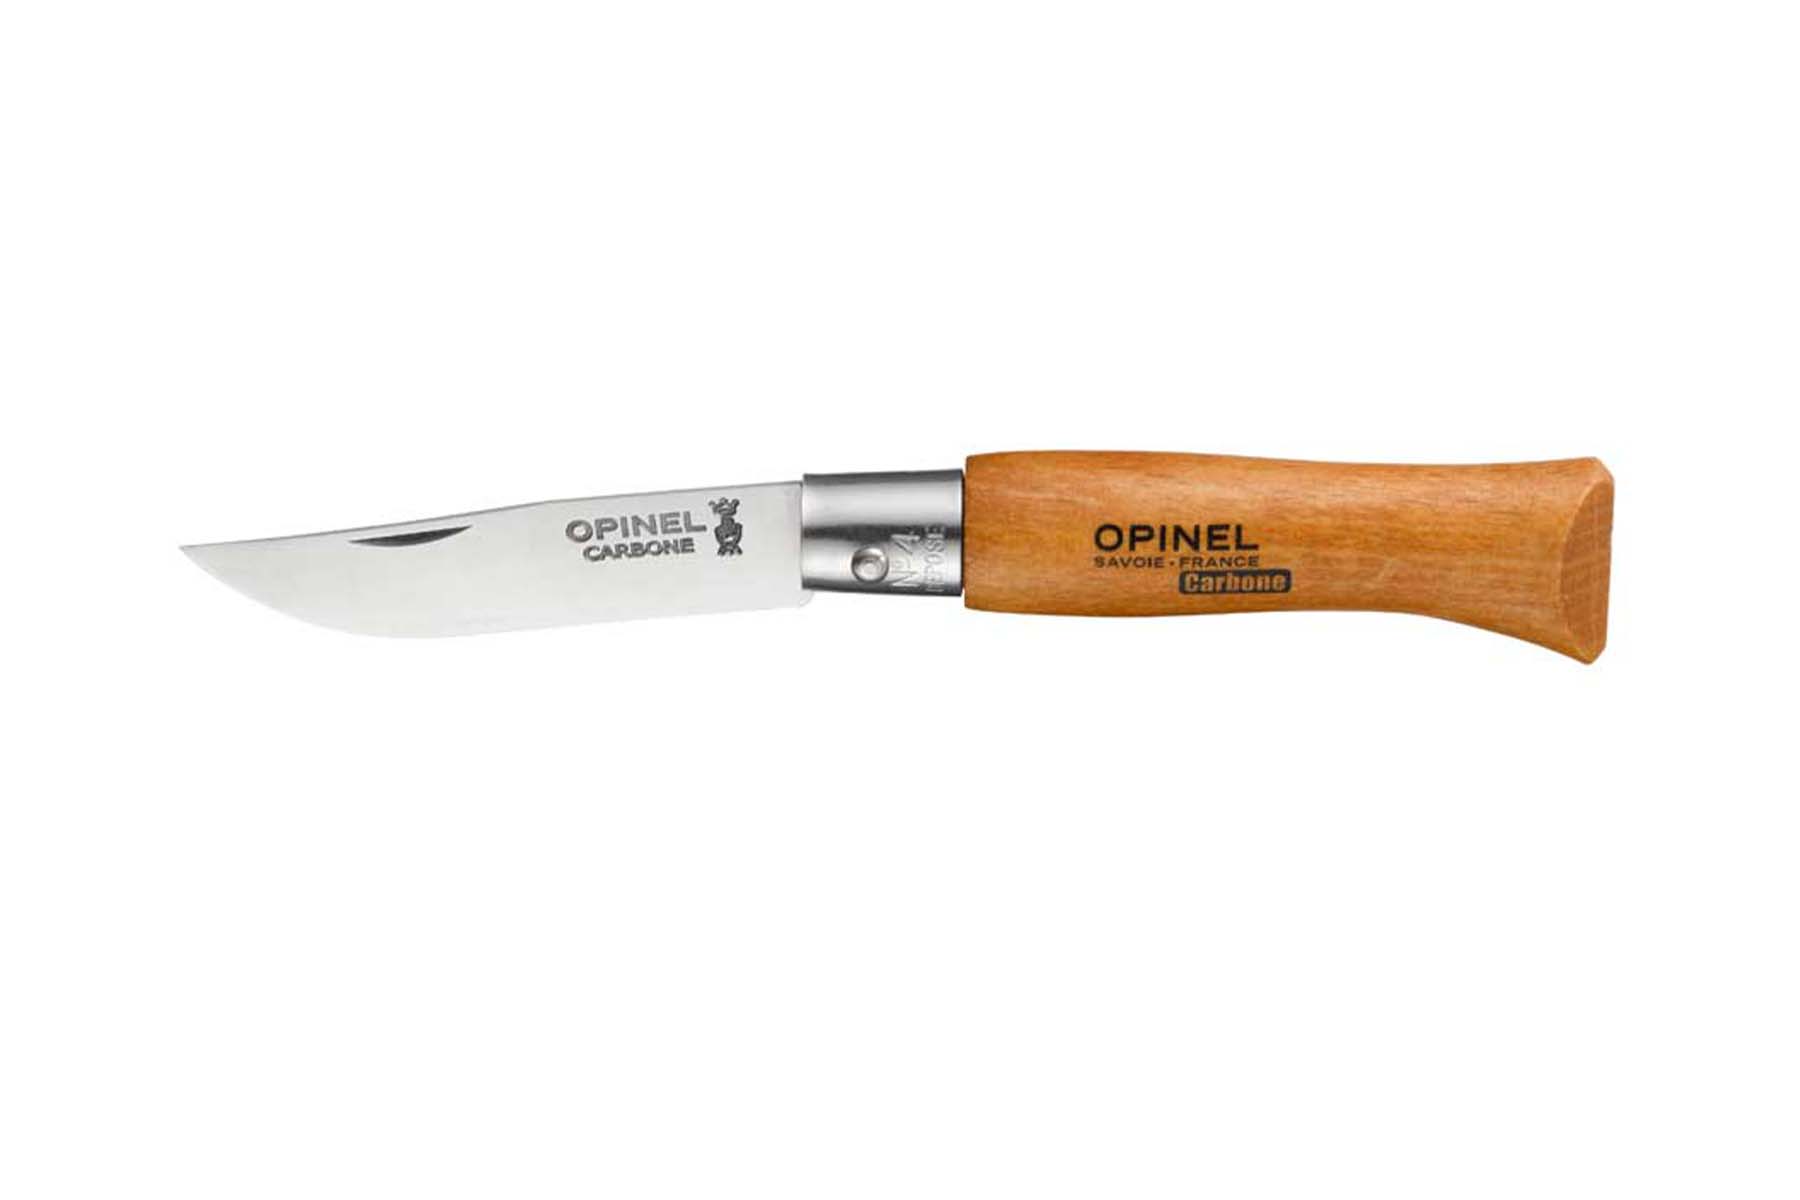 Couteau Opinel n°04 lame carbone